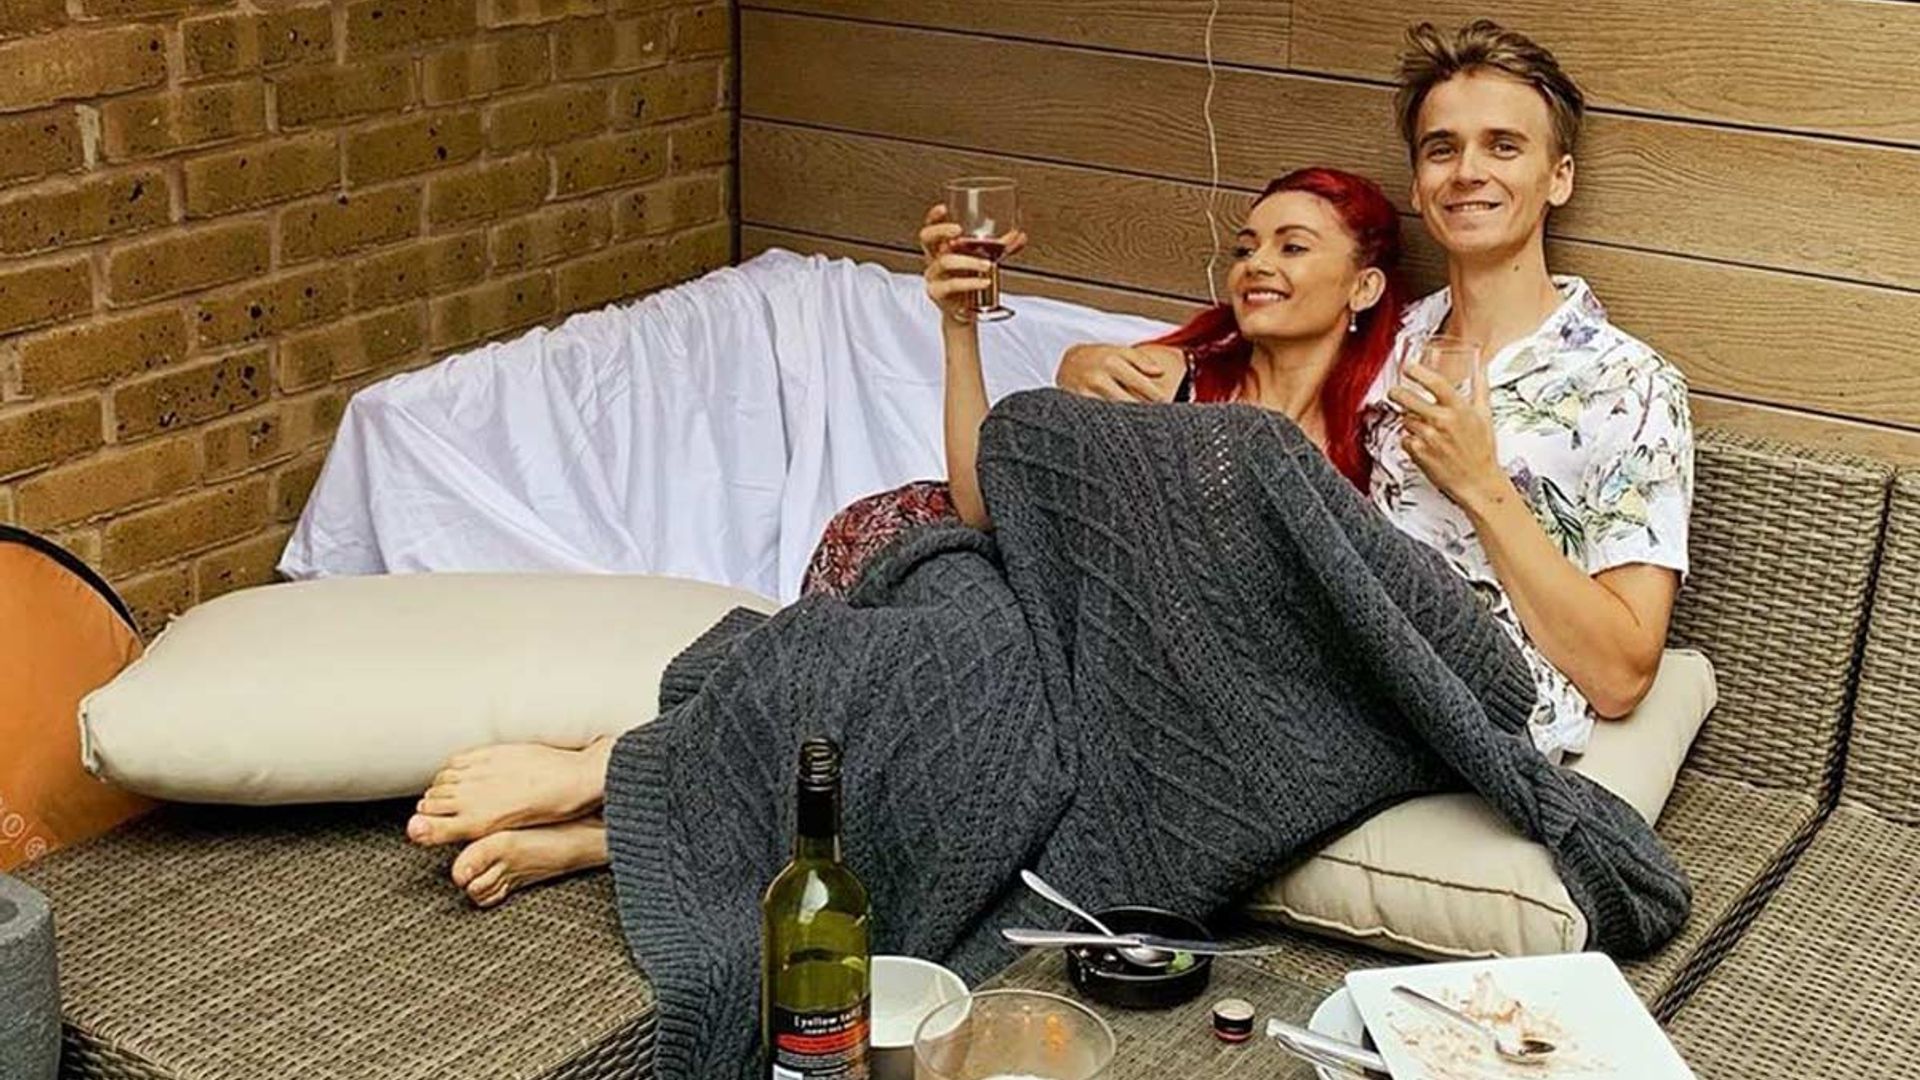 Dianne Buswell treats boyfriend Joe Sugg to show-stopping gold birthday cake